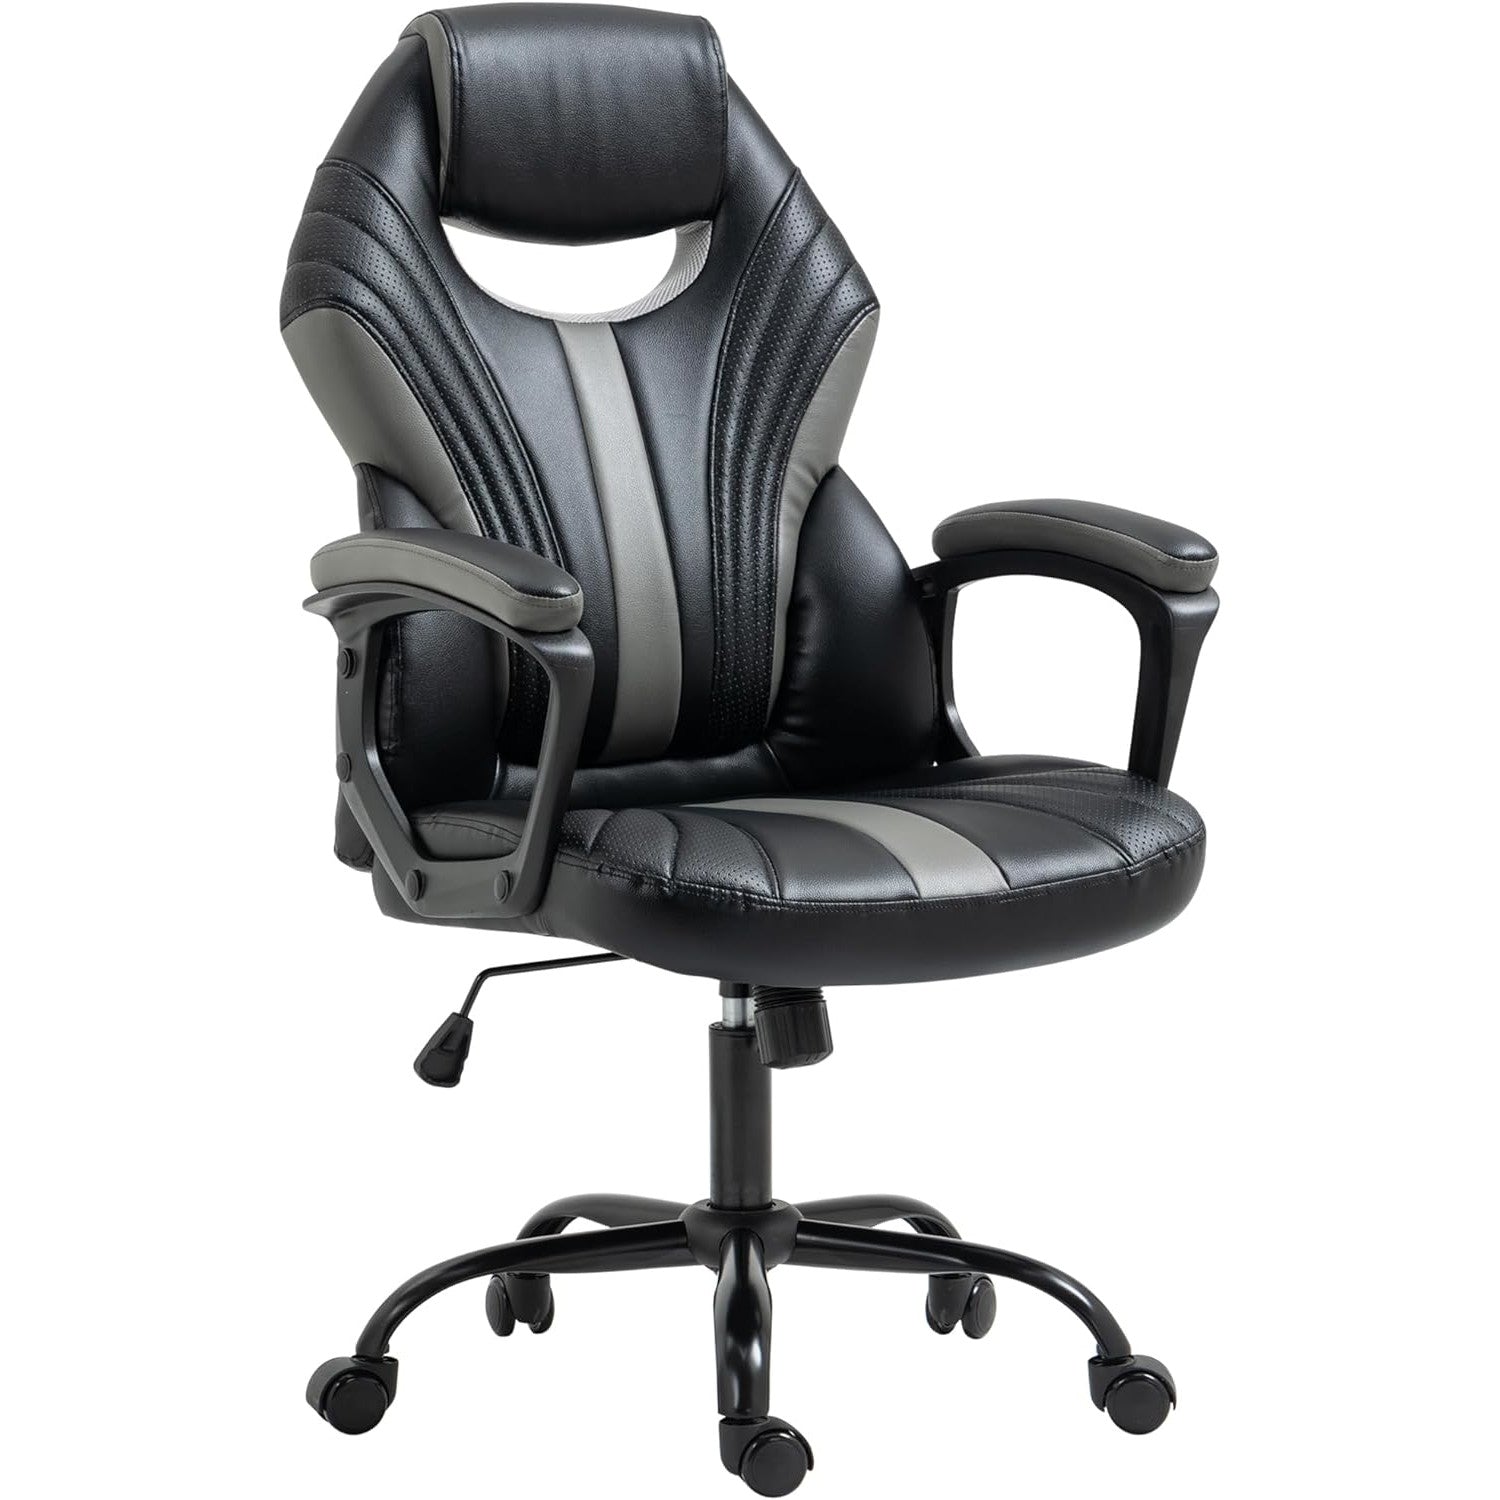 Maplin Faux Leather Adjustable Swivel Gaming Chair - Black